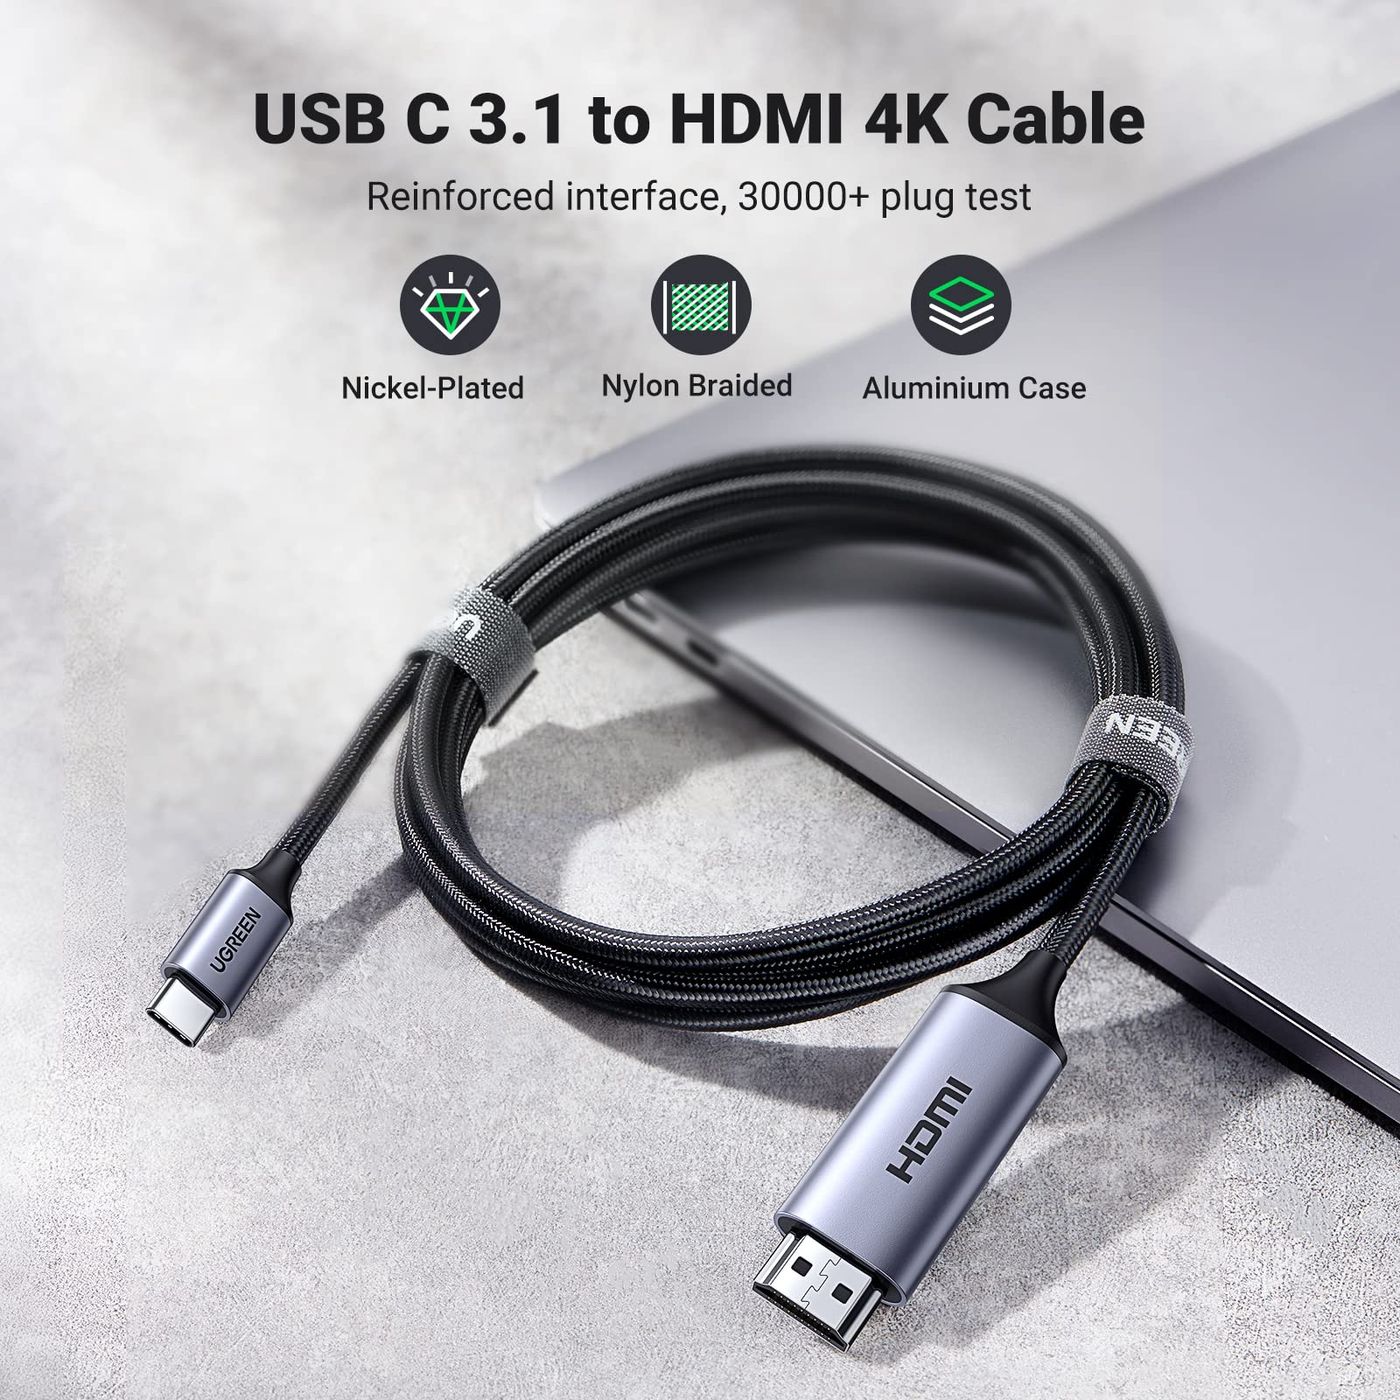 Кабель Type-C to HDMI UGREEN MM142 M/M Cable Aluminum Shell 1.5m Gray (50570)